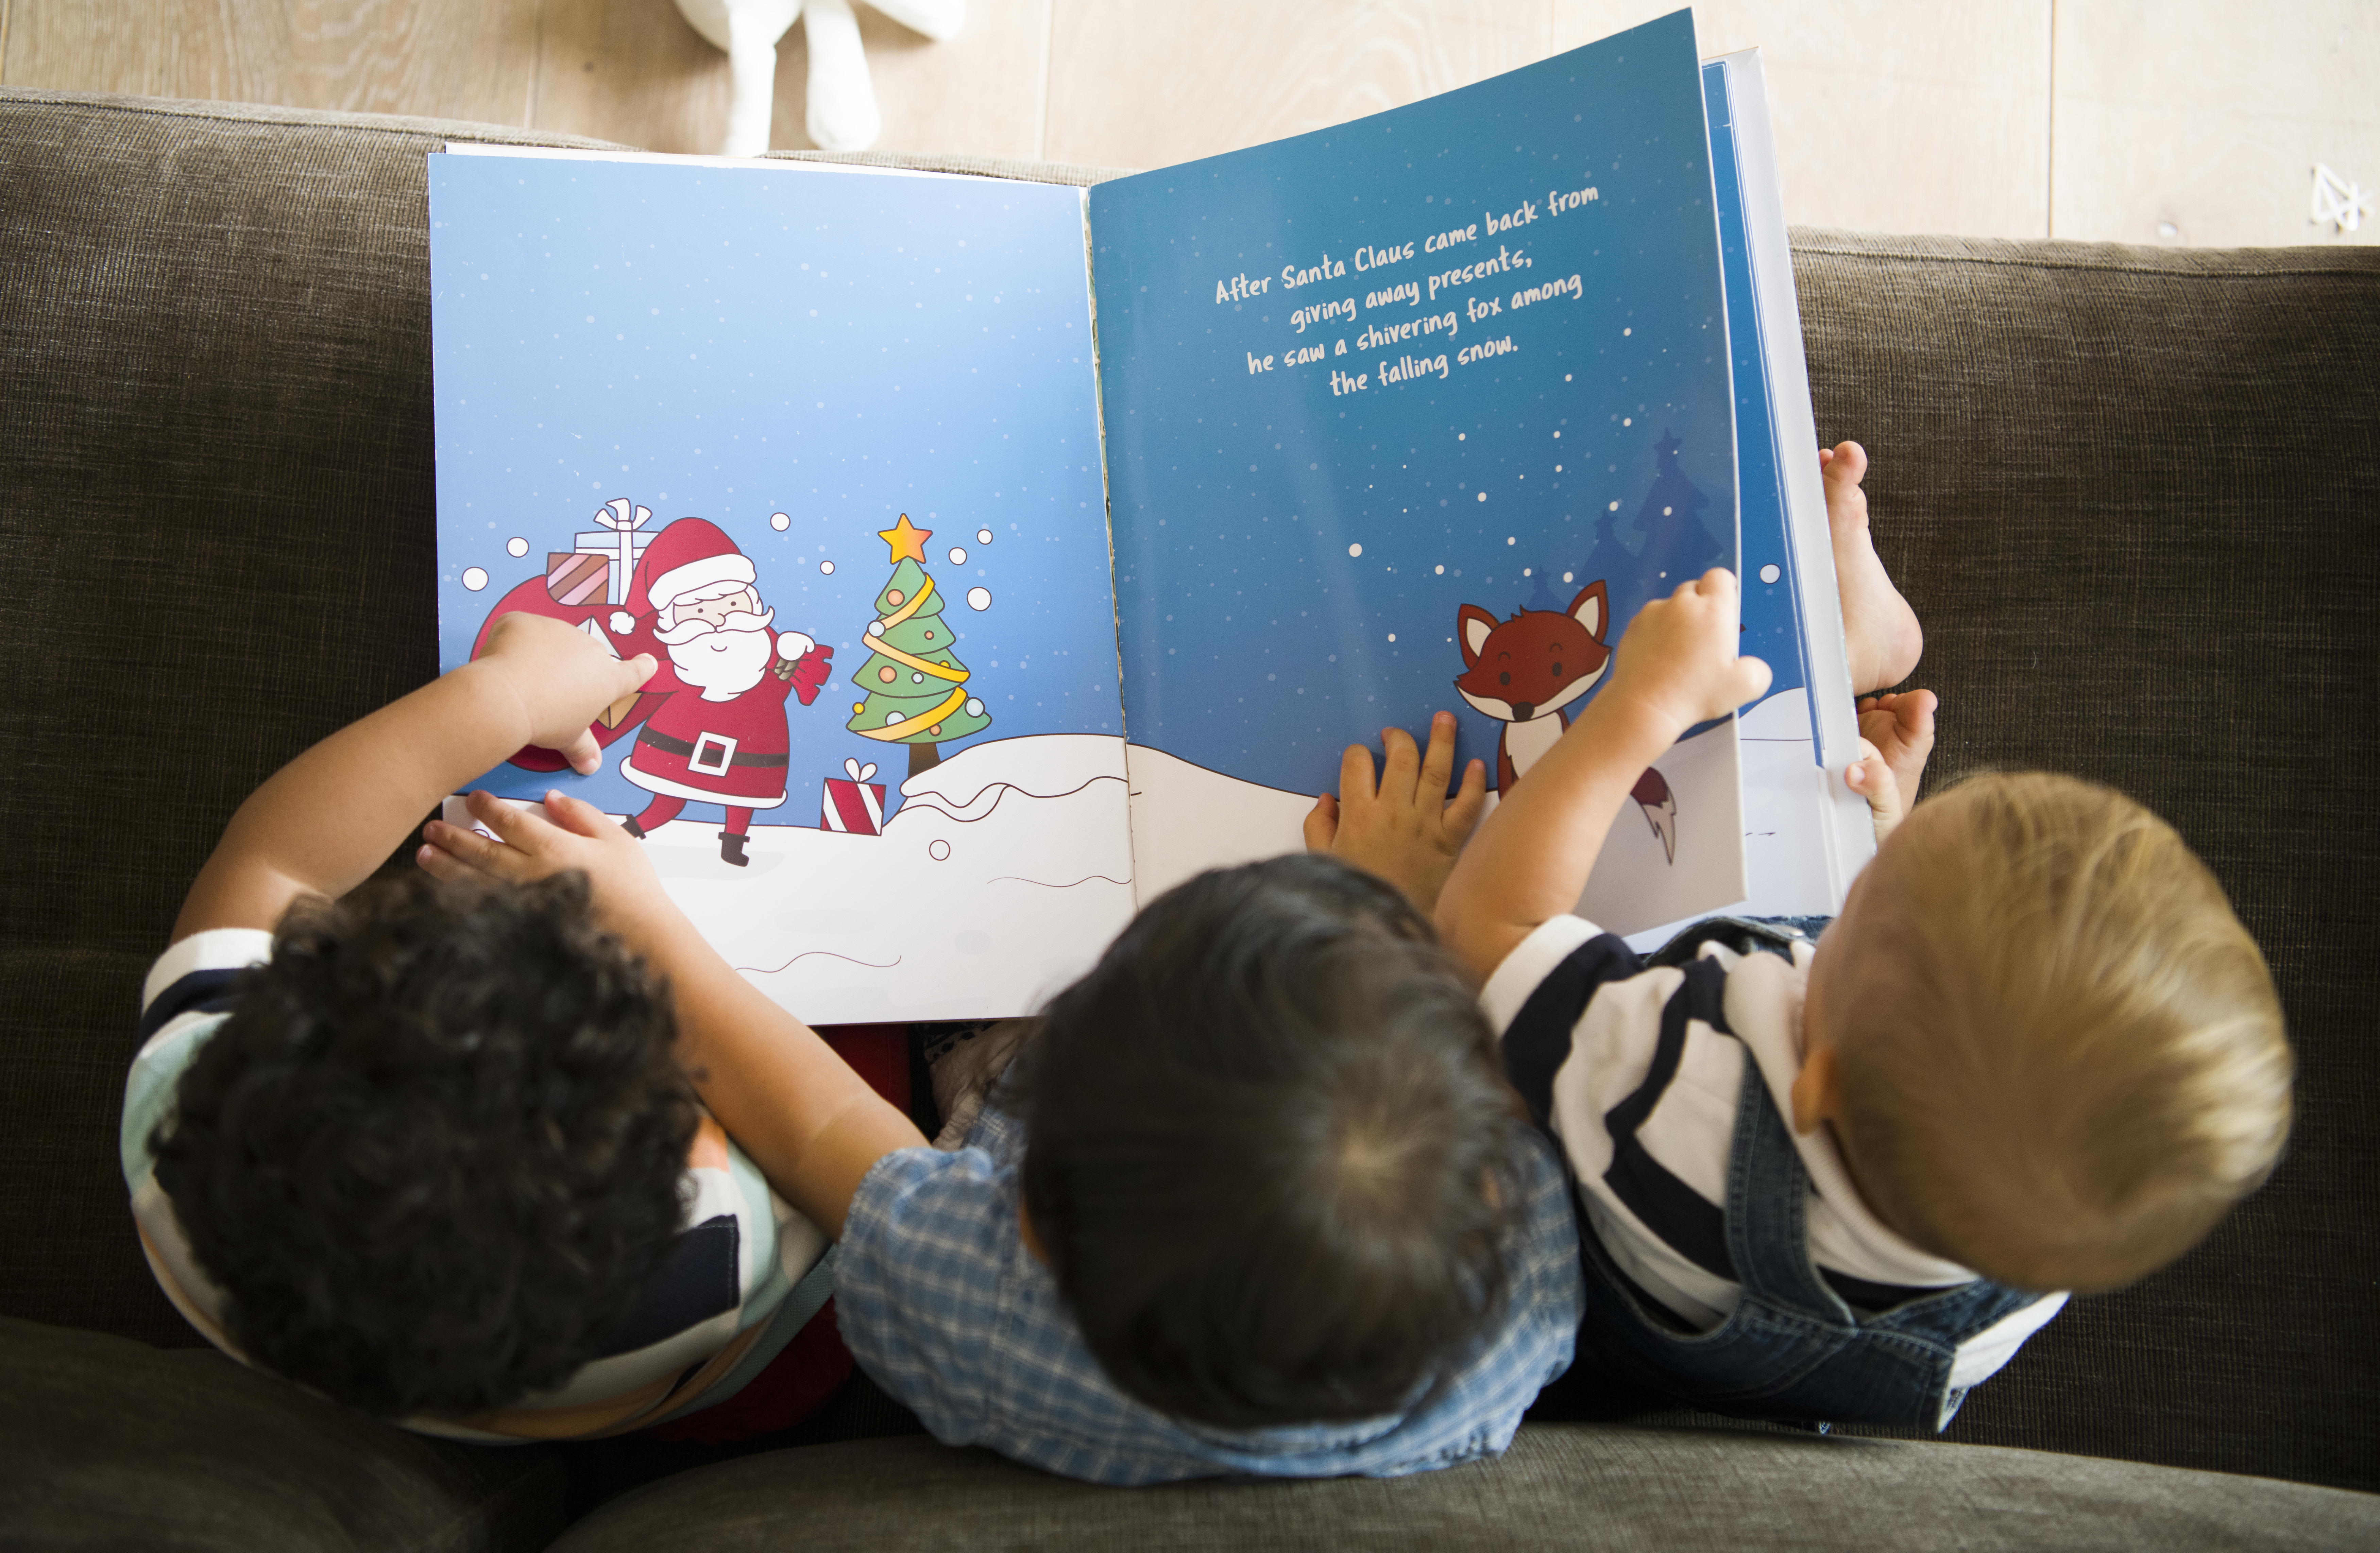 3 babies on a couch holding a Christmas book